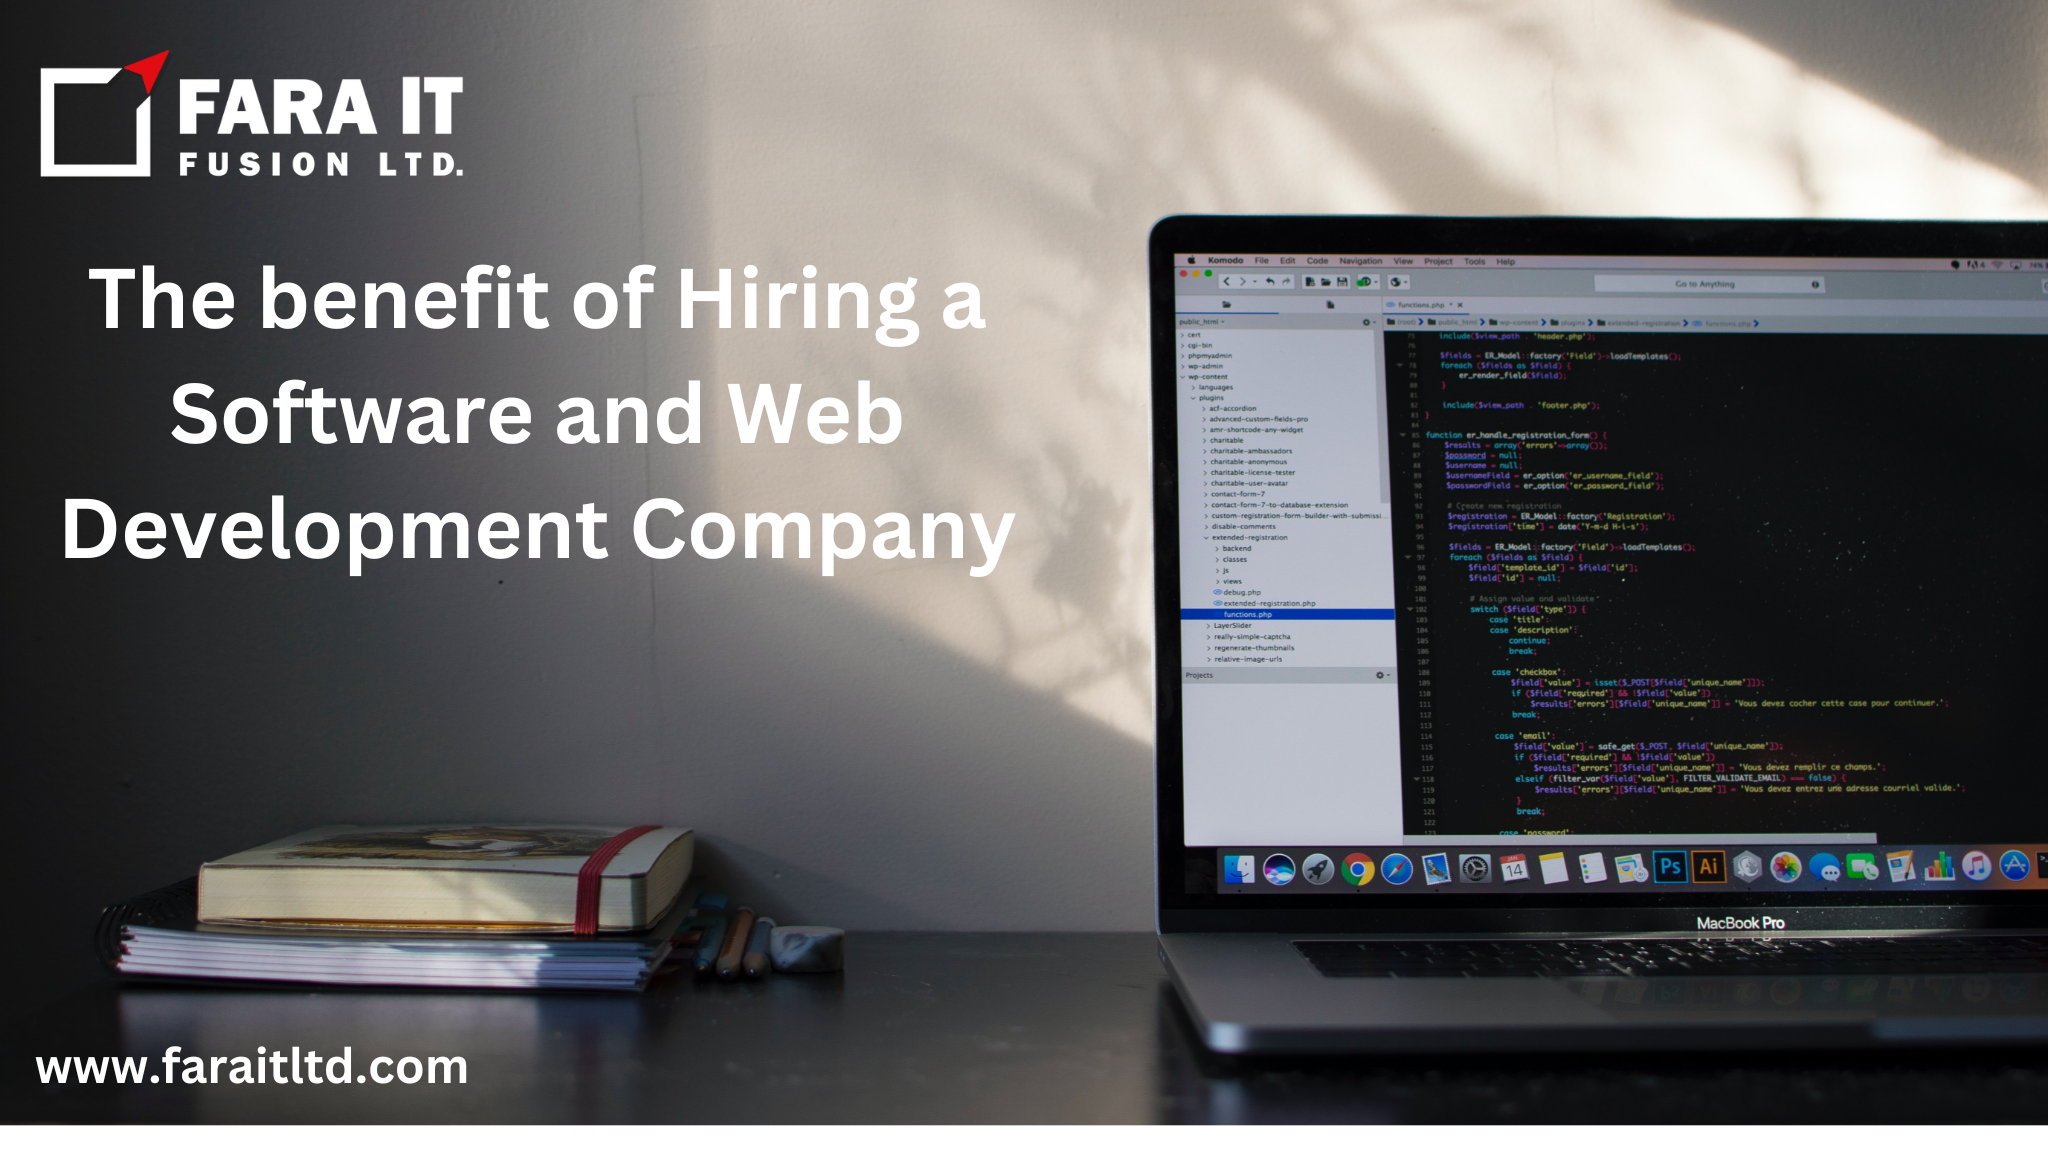 The benefit of hiring a software and web development company